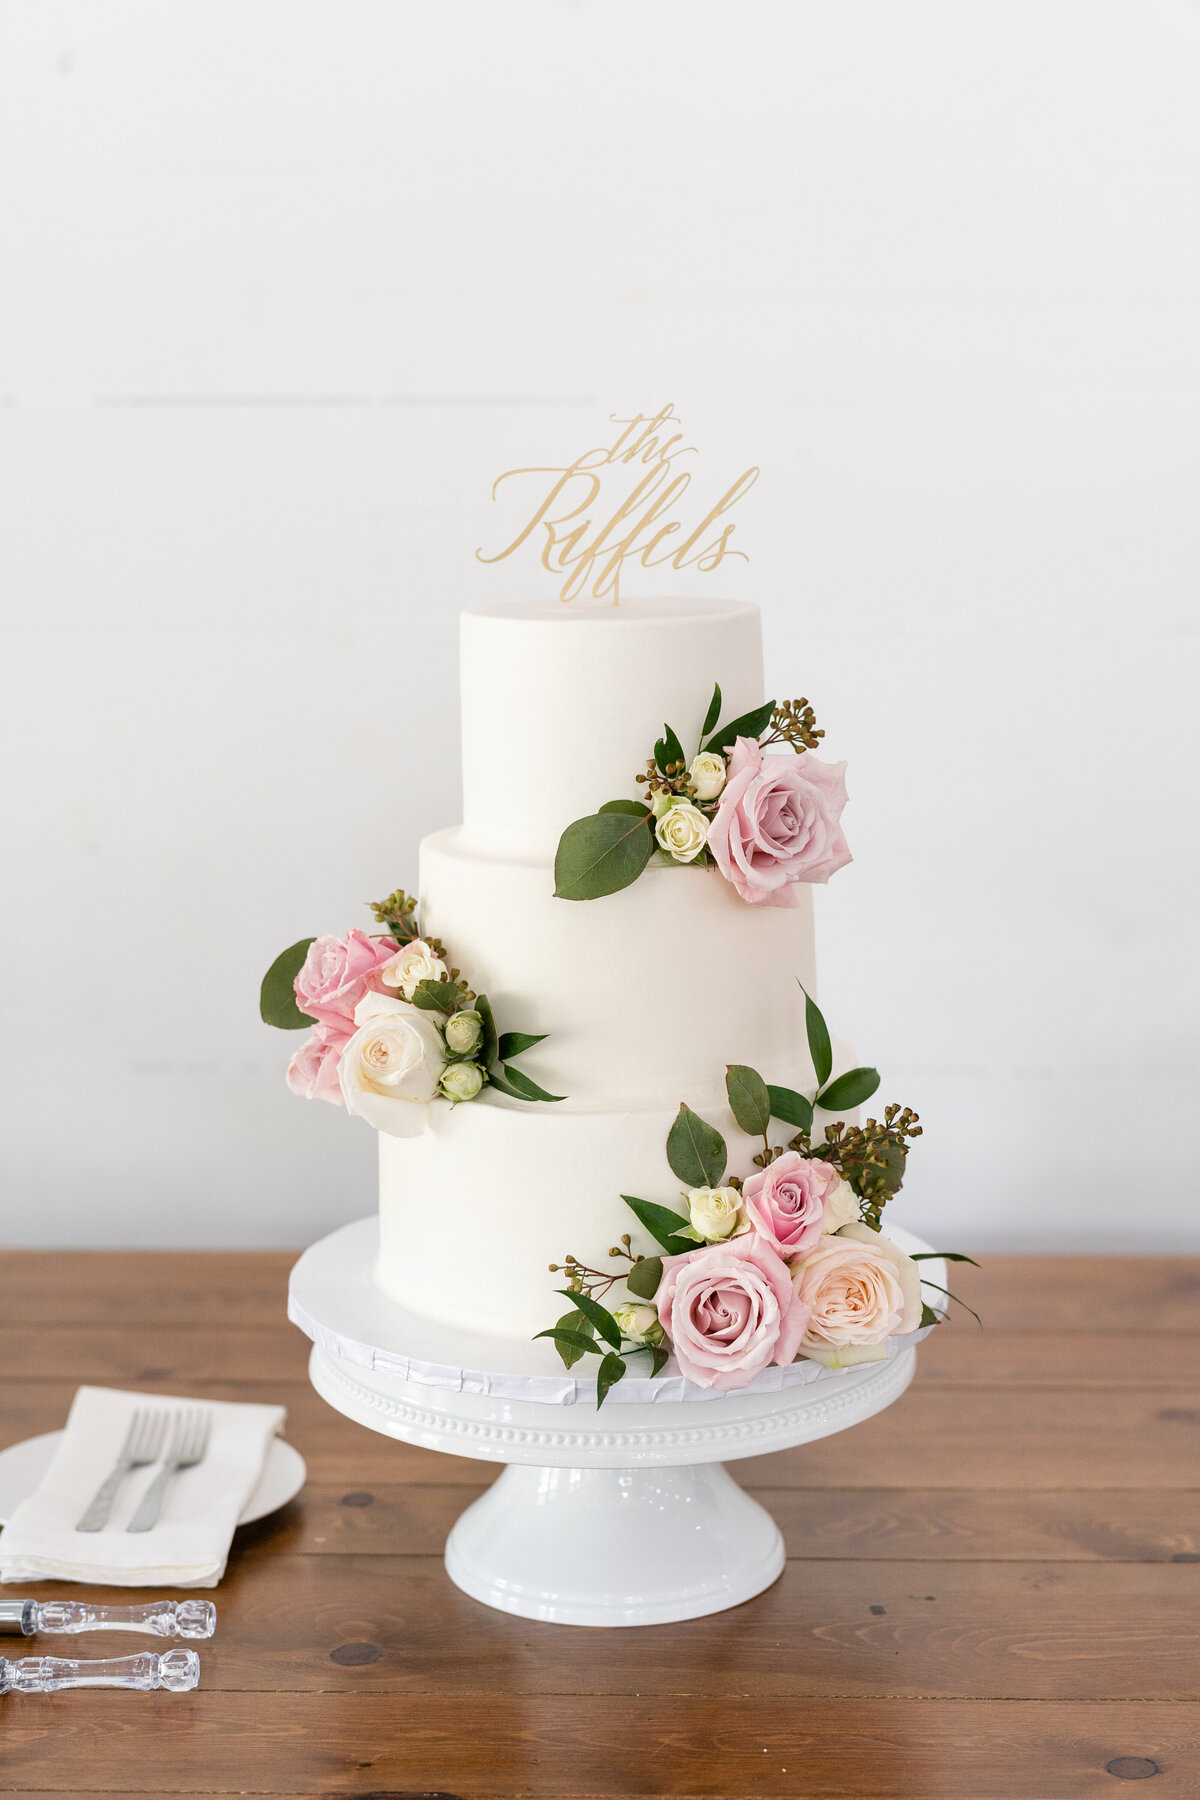 White with pink flowers and greenery on wedding cake